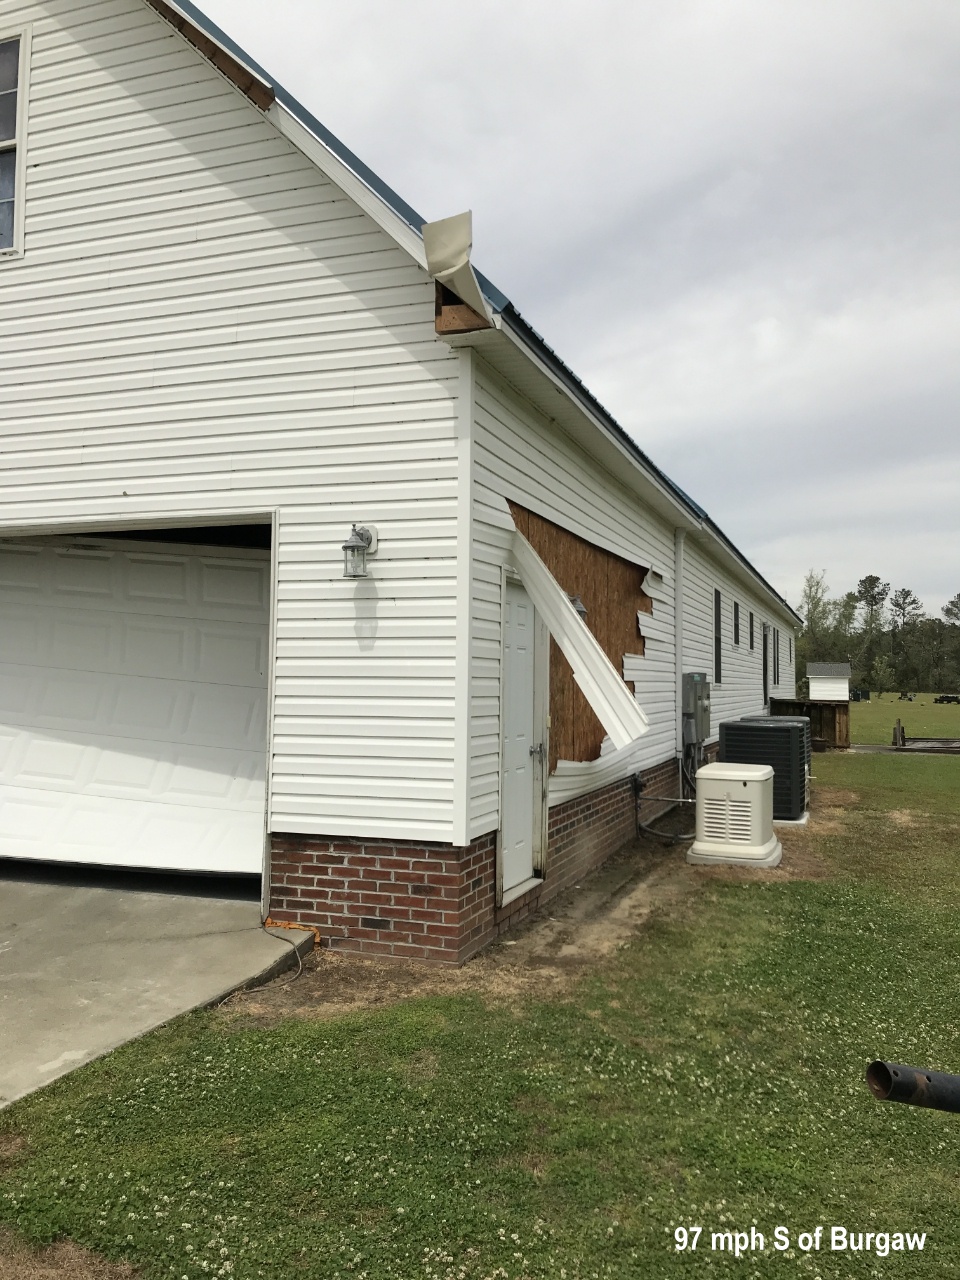 The garage door was pushed in and vinyl siding was ripped off this home south of Burgaw.  Based on observed damage, wind speeds were estimated to have reached 97 mph here.